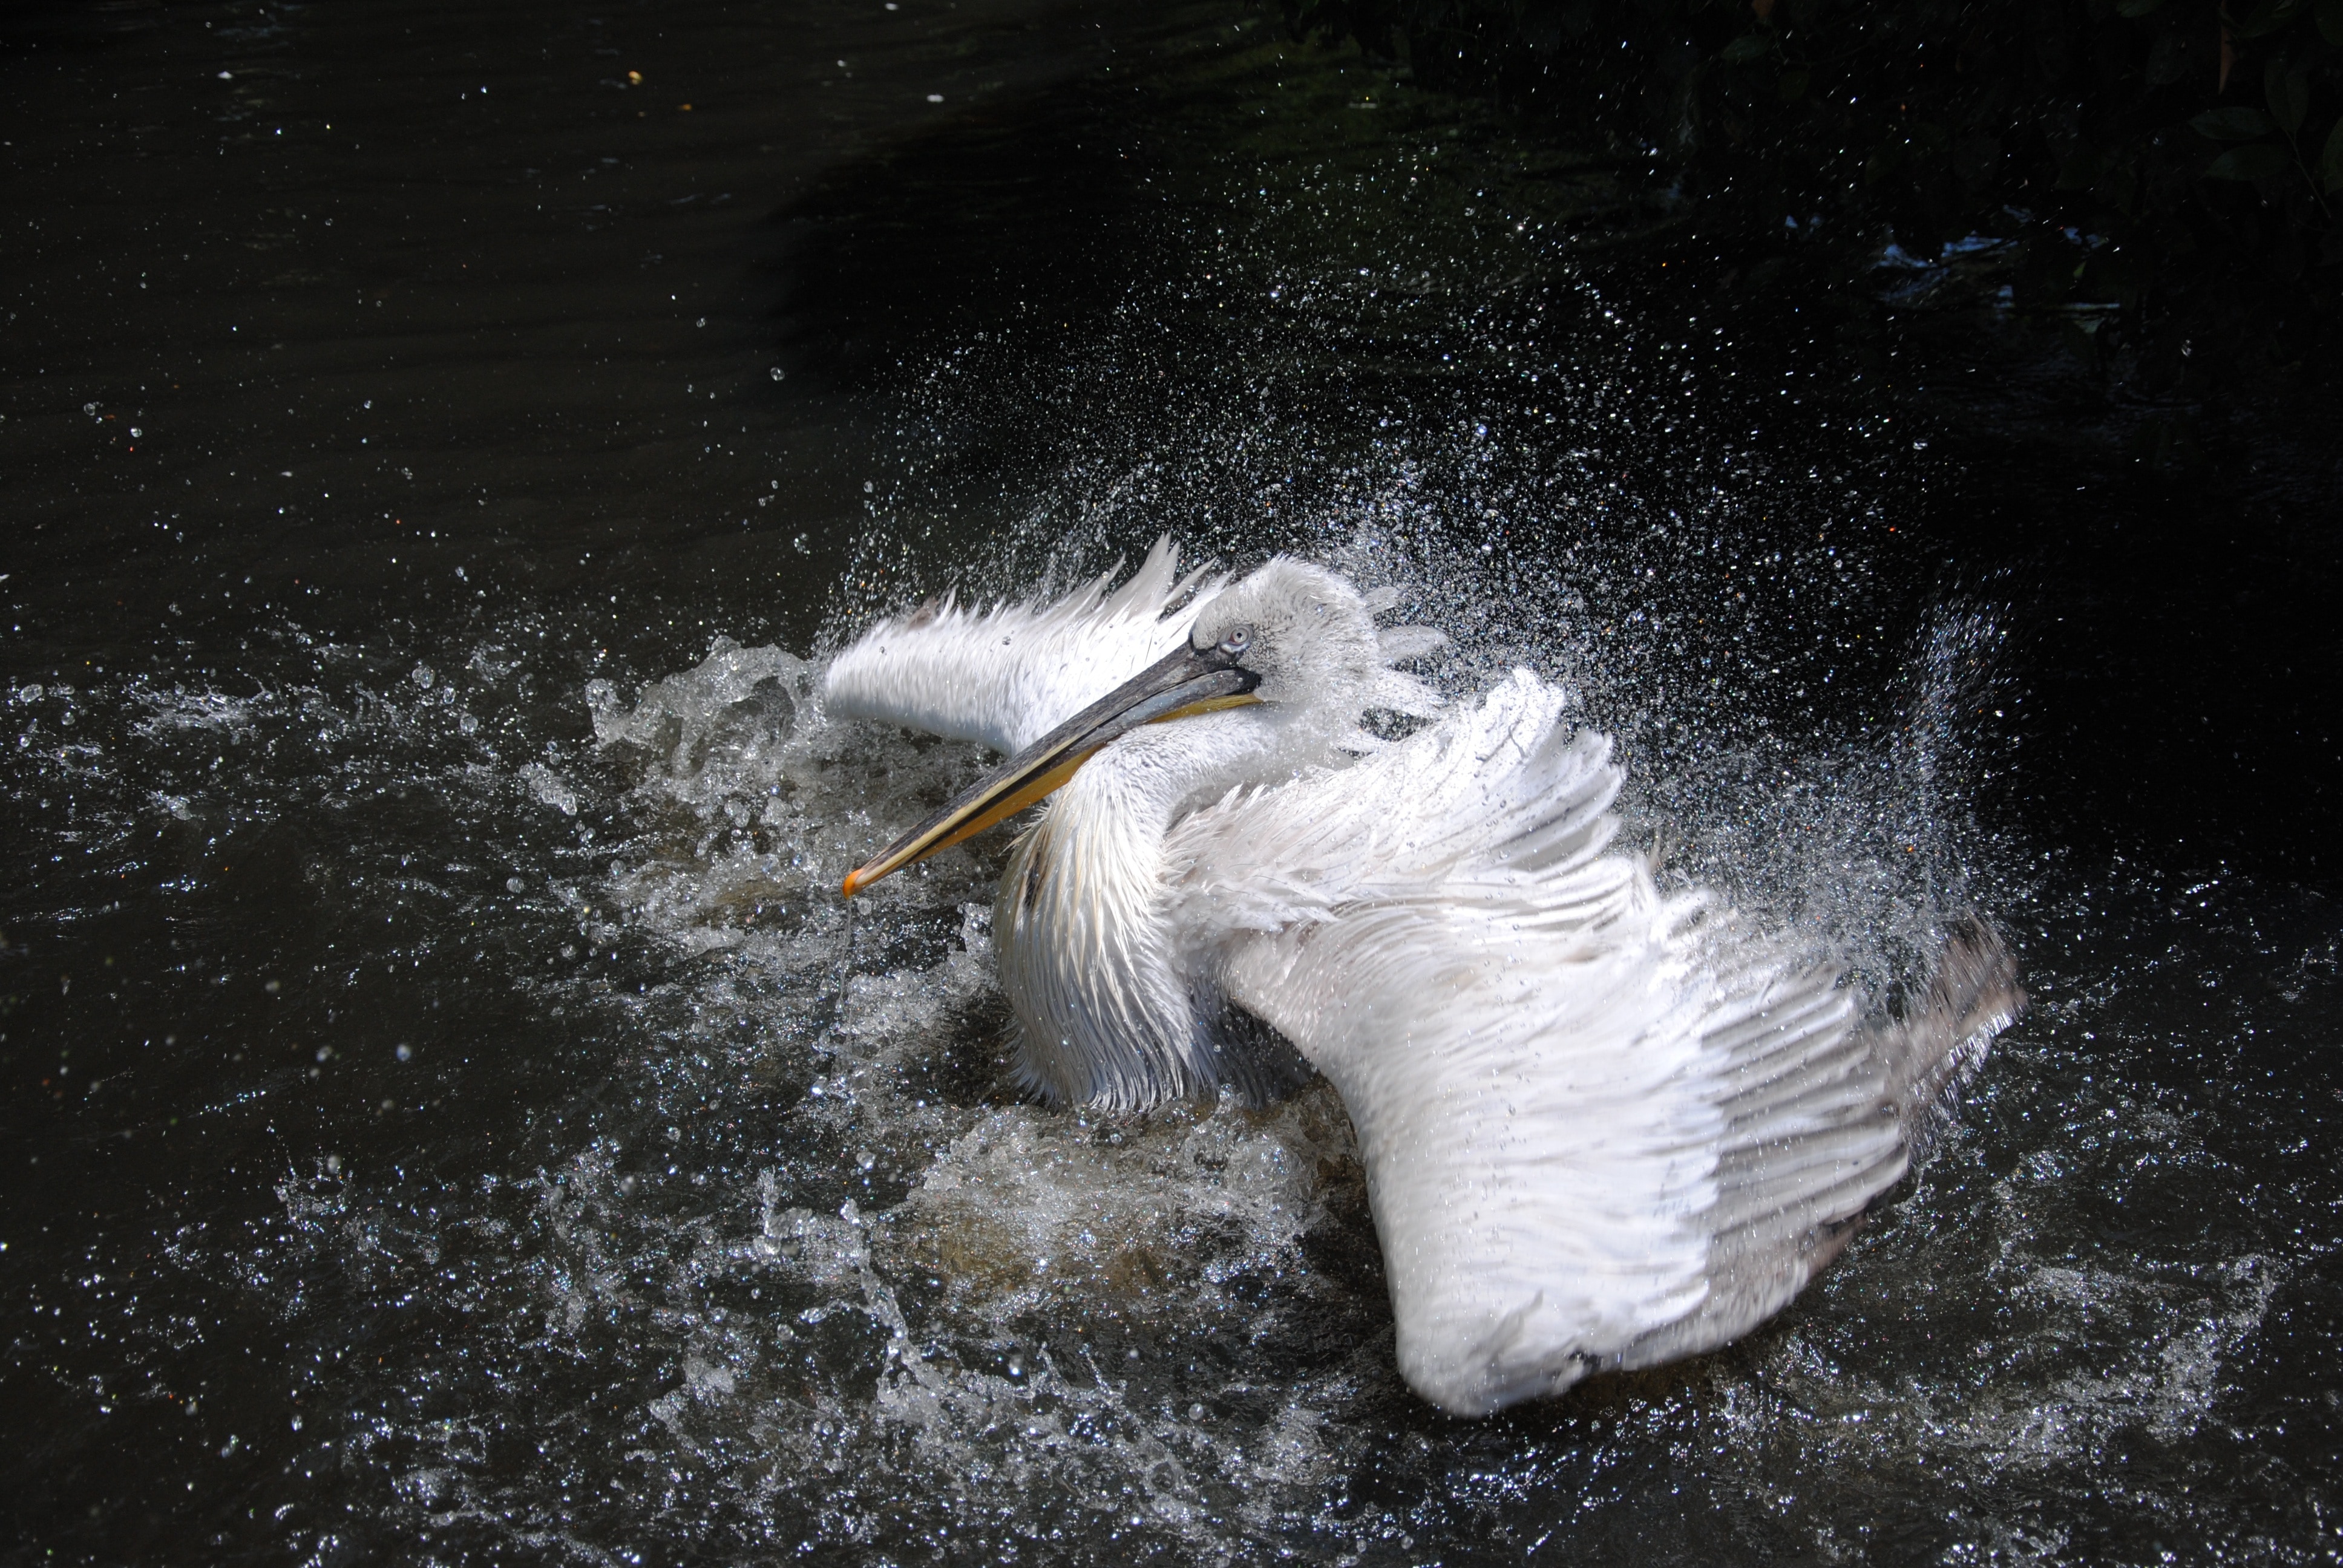 photo of white long beak bird surrounded by body of water